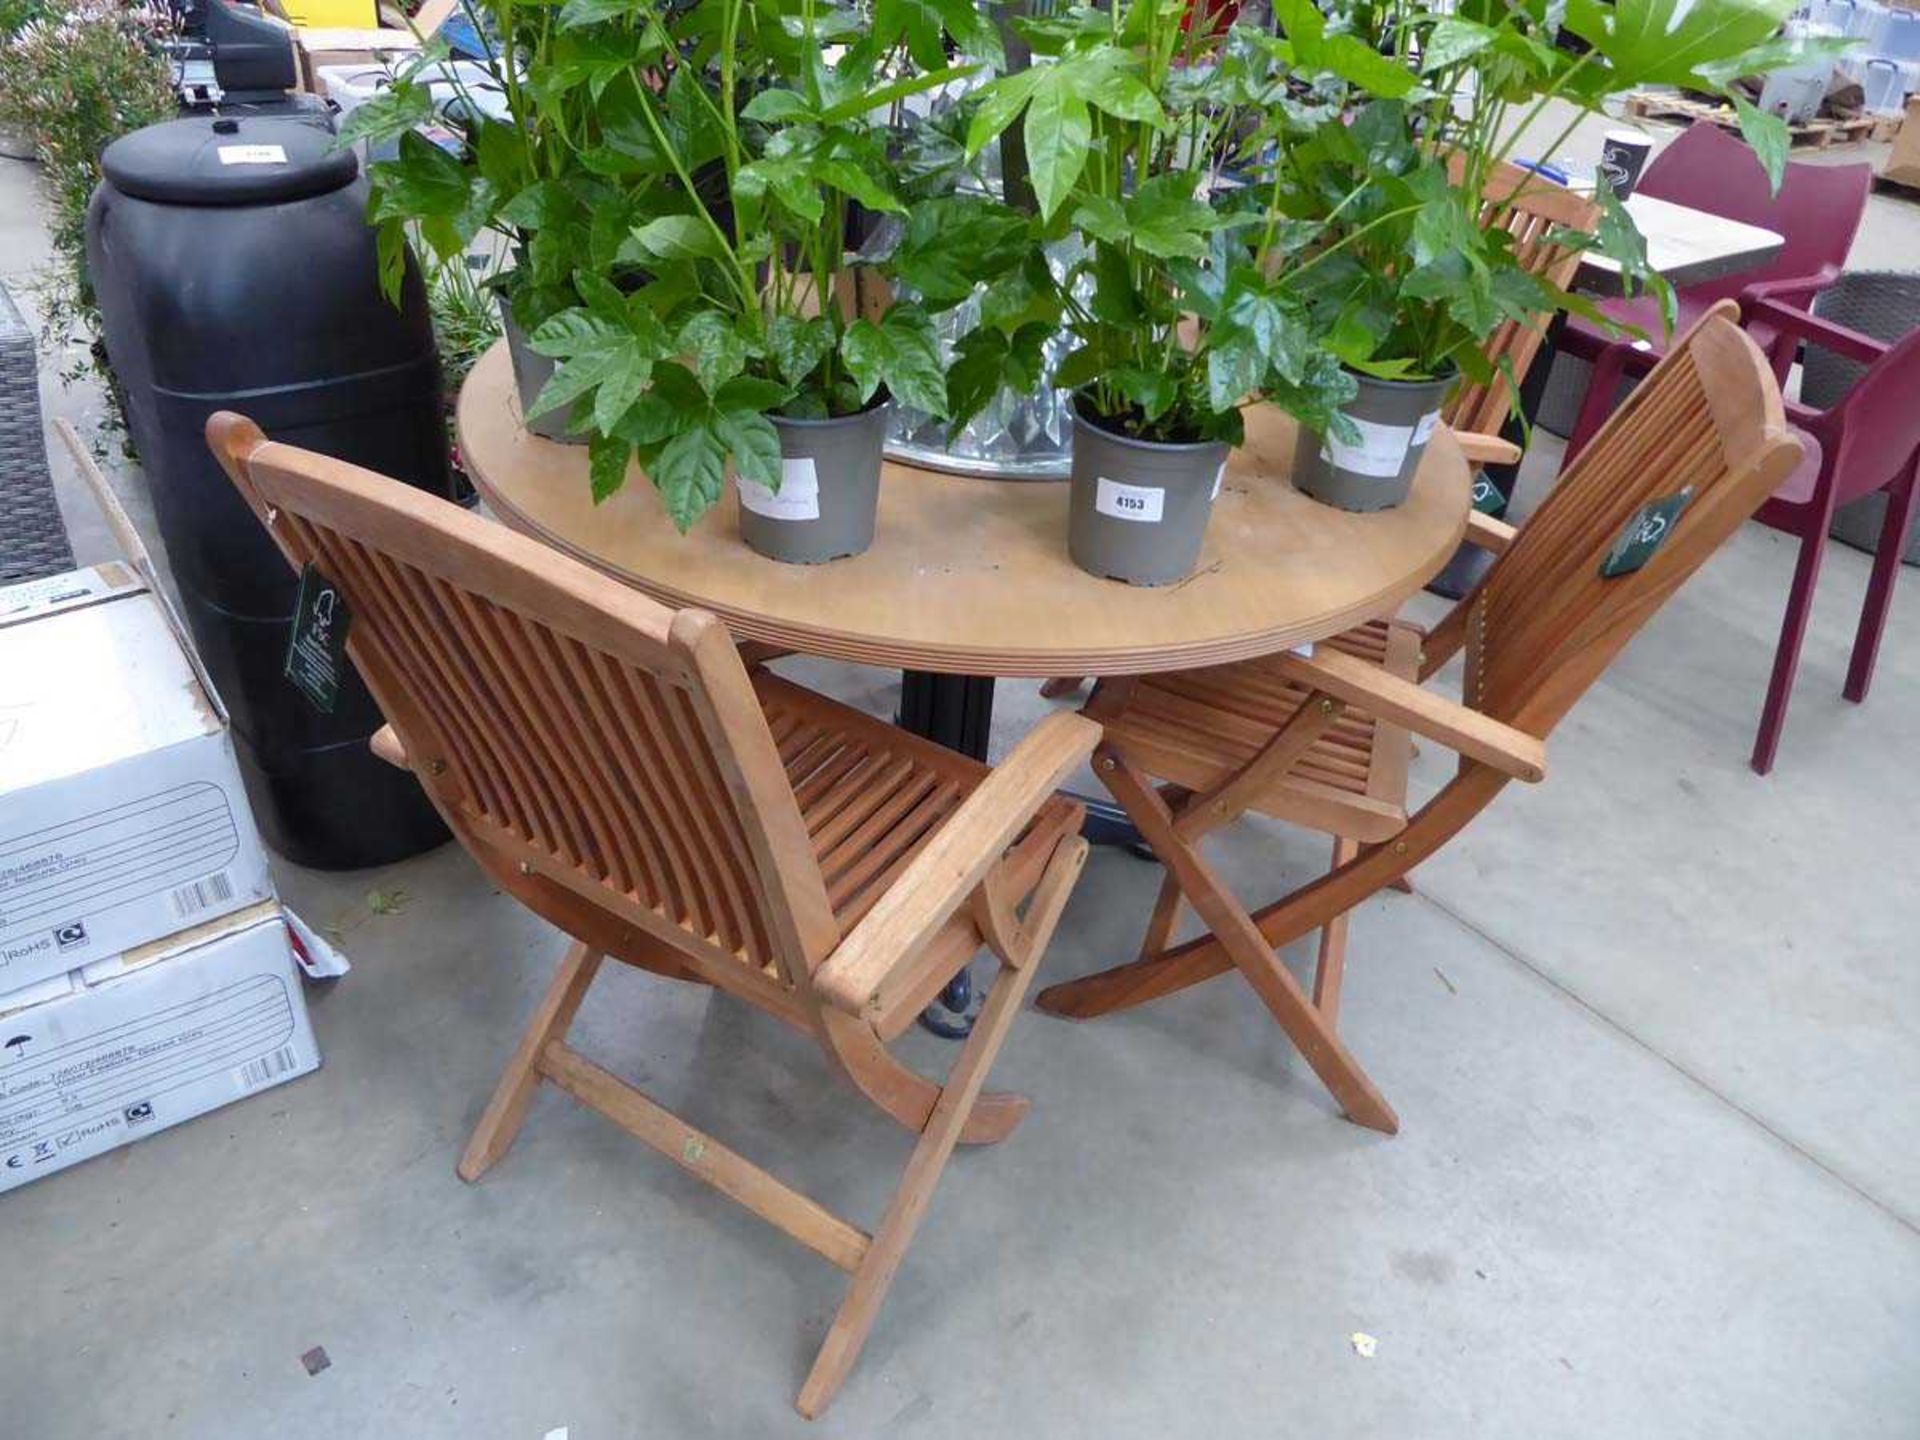 Round wooden garden table, and 4 wooden fold up garden chairs